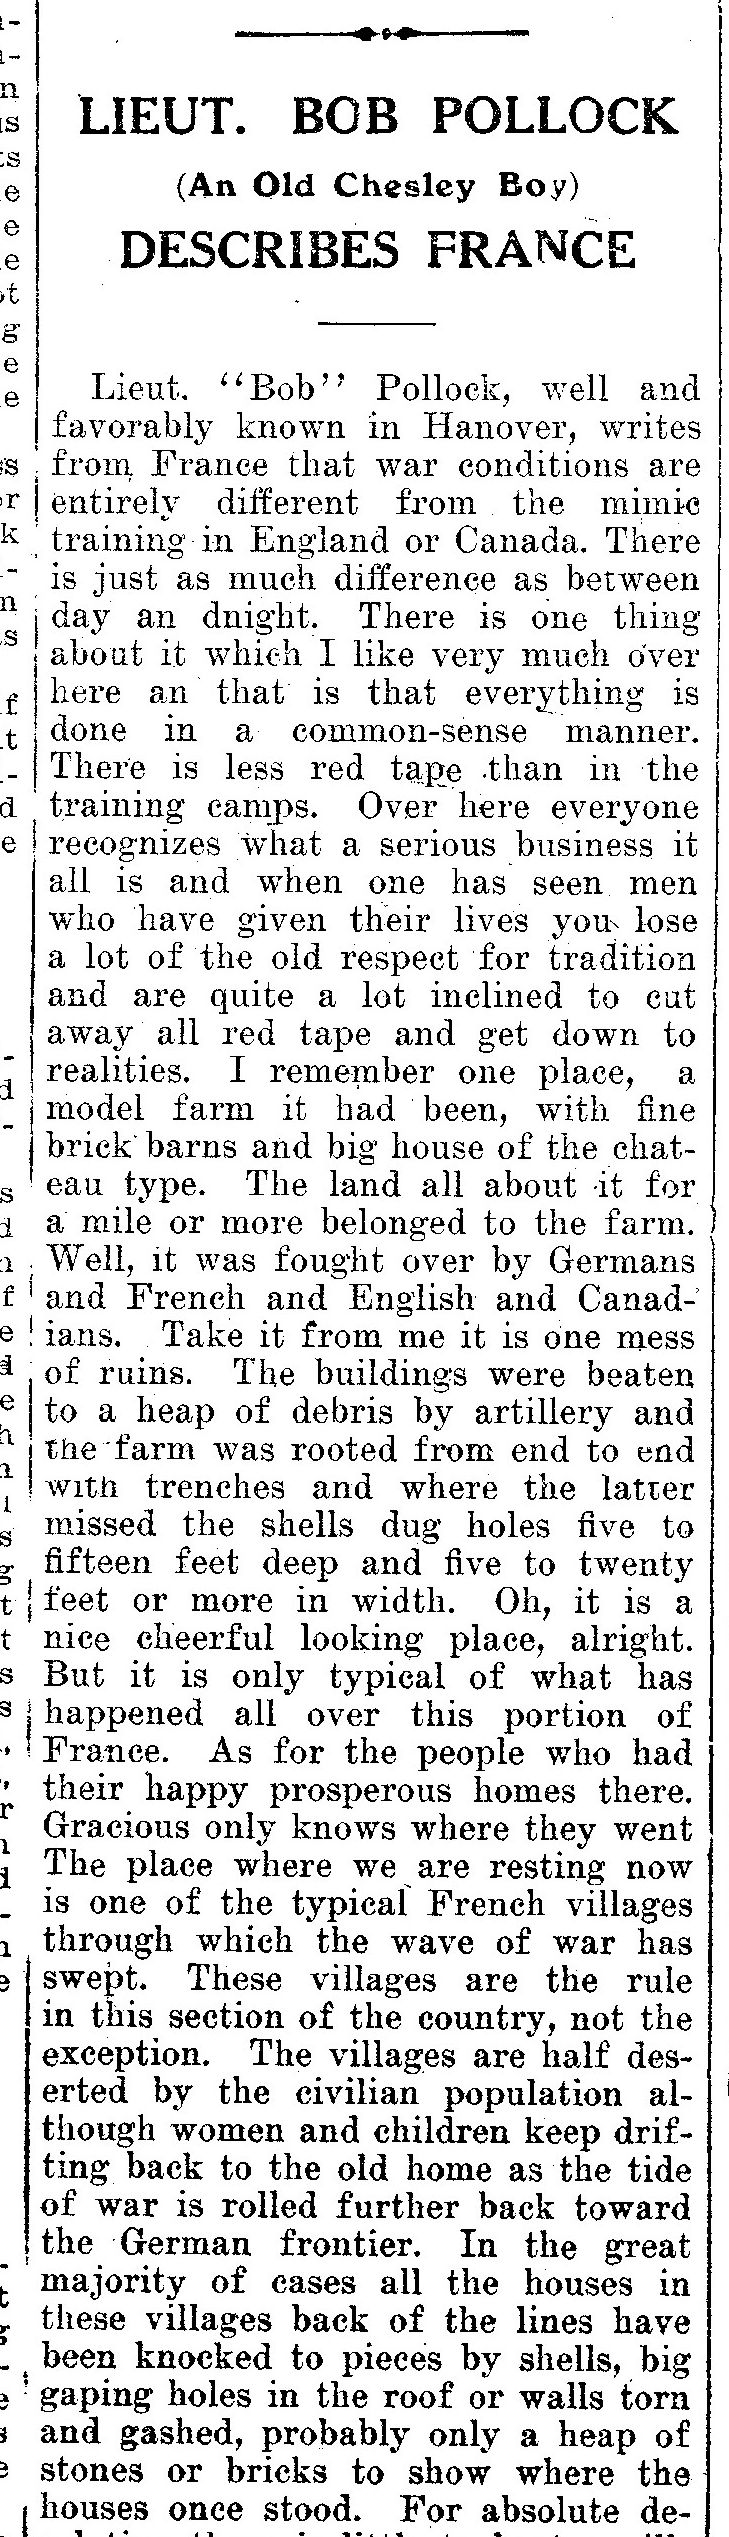 The Chesley Enterprise, June 14, 1917 (1 of 2)